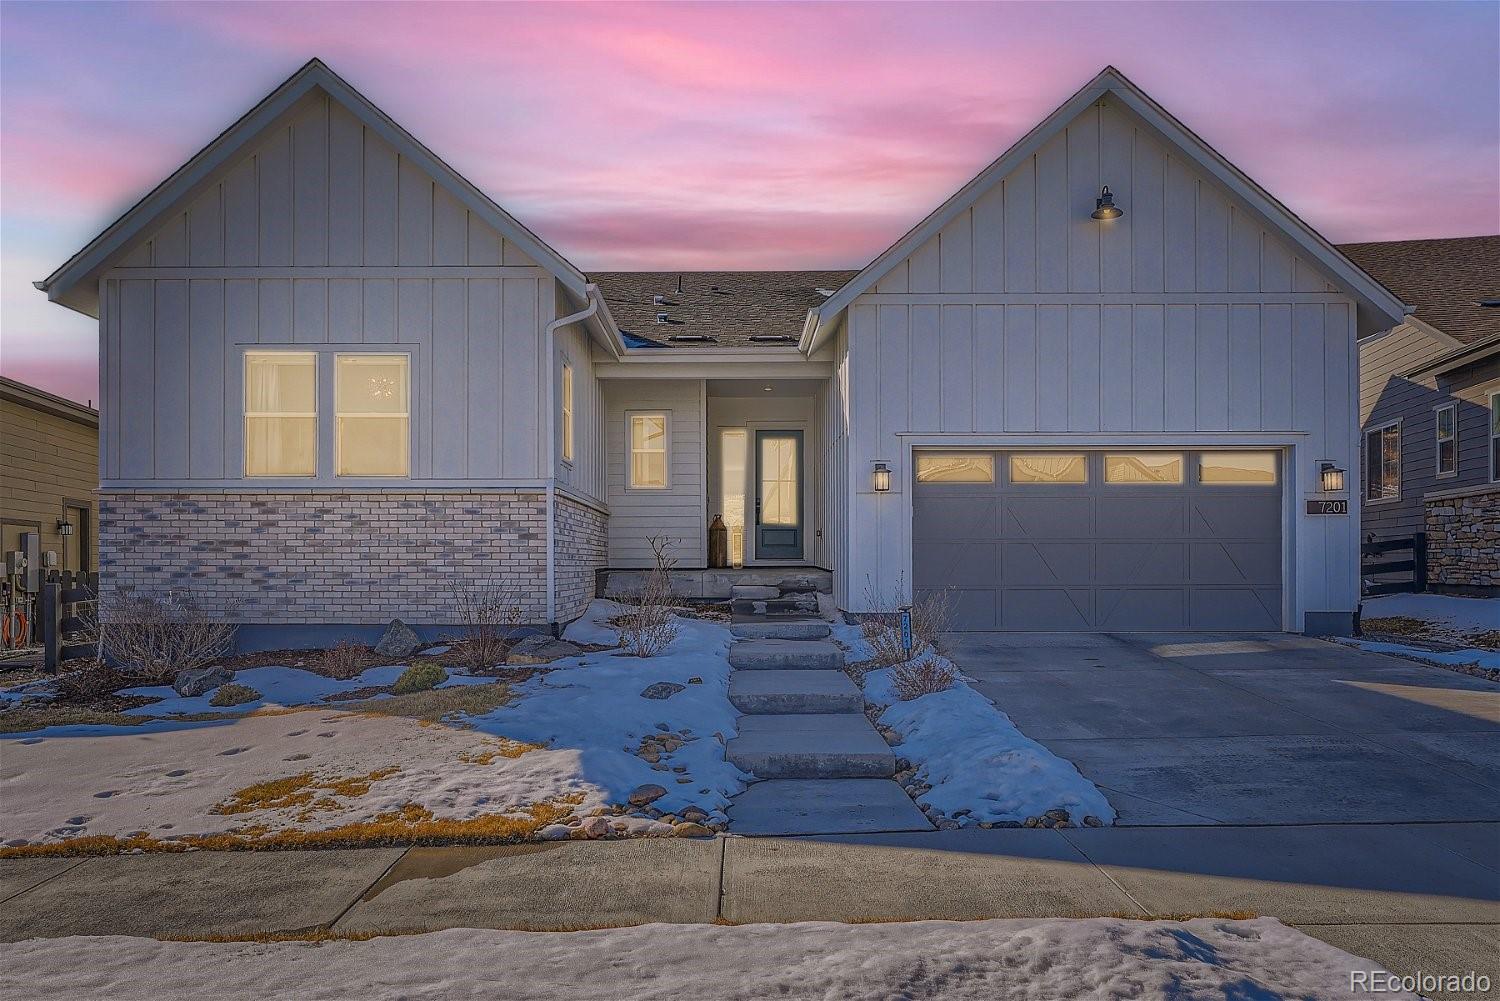 7201  Bellcove Trail, castle pines MLS: 8837049 Beds: 3 Baths: 3 Price: $1,195,000